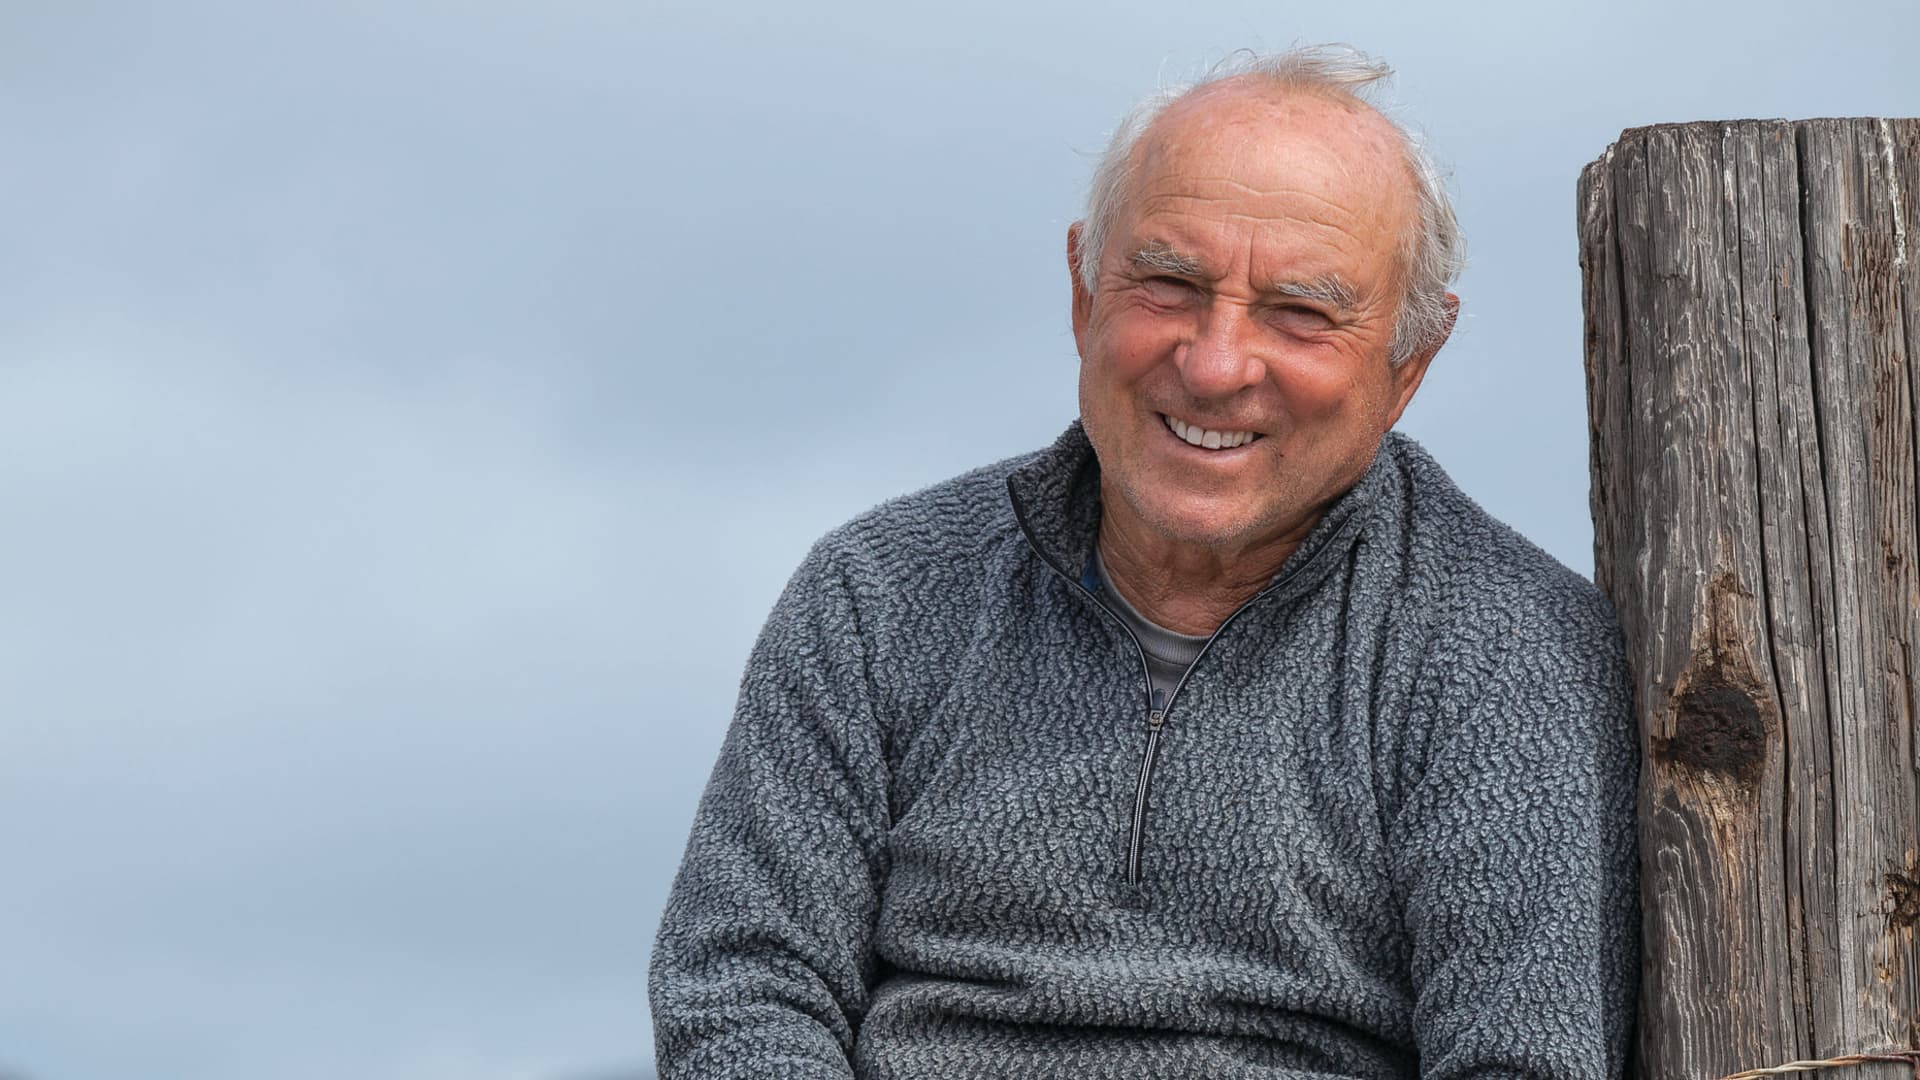 Patagonia founder just donated the entire company, worth $3 billion, to fight climate change